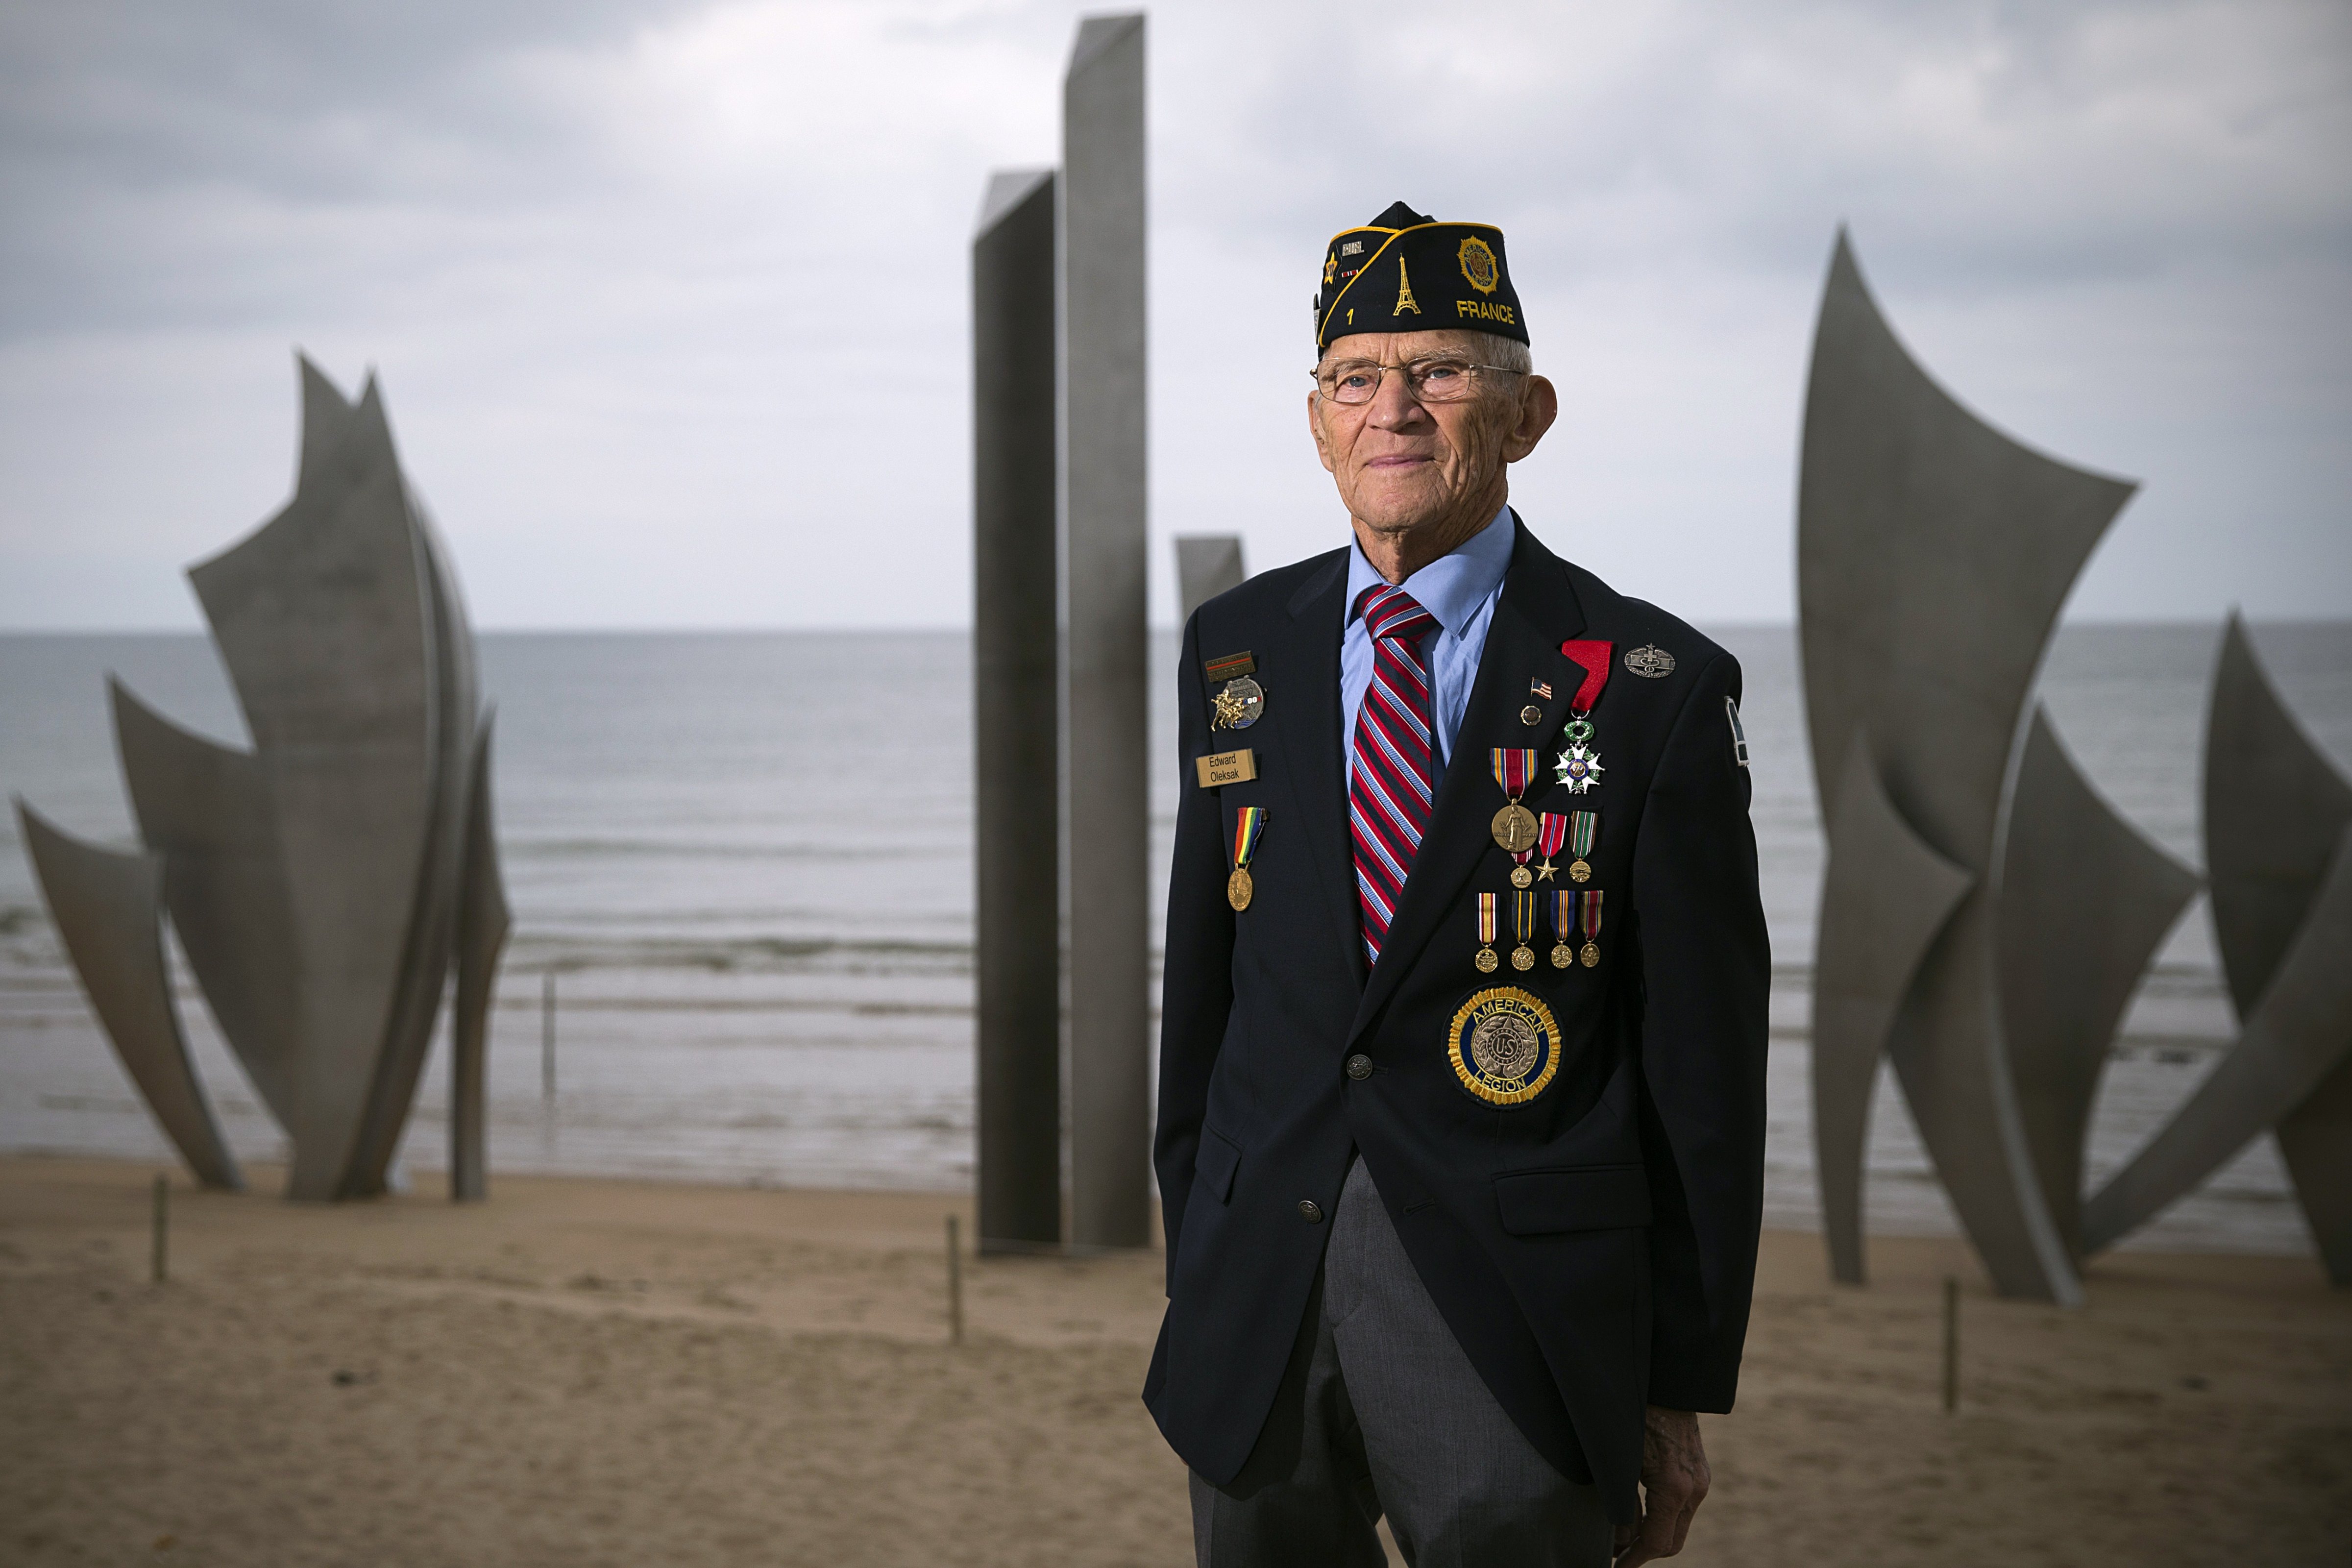 US WWII veteran Edward W.Oleksak, who landed on June 6, 1944 in Omaha Beach, poses in front of the statue ''Les Braves'' by French sculptor Anilore Banon, on June 2, 2014 in Omaha Beach, near Saint-Laurent-sur-Mer. (Joel Saget—AFP/Getty Images)